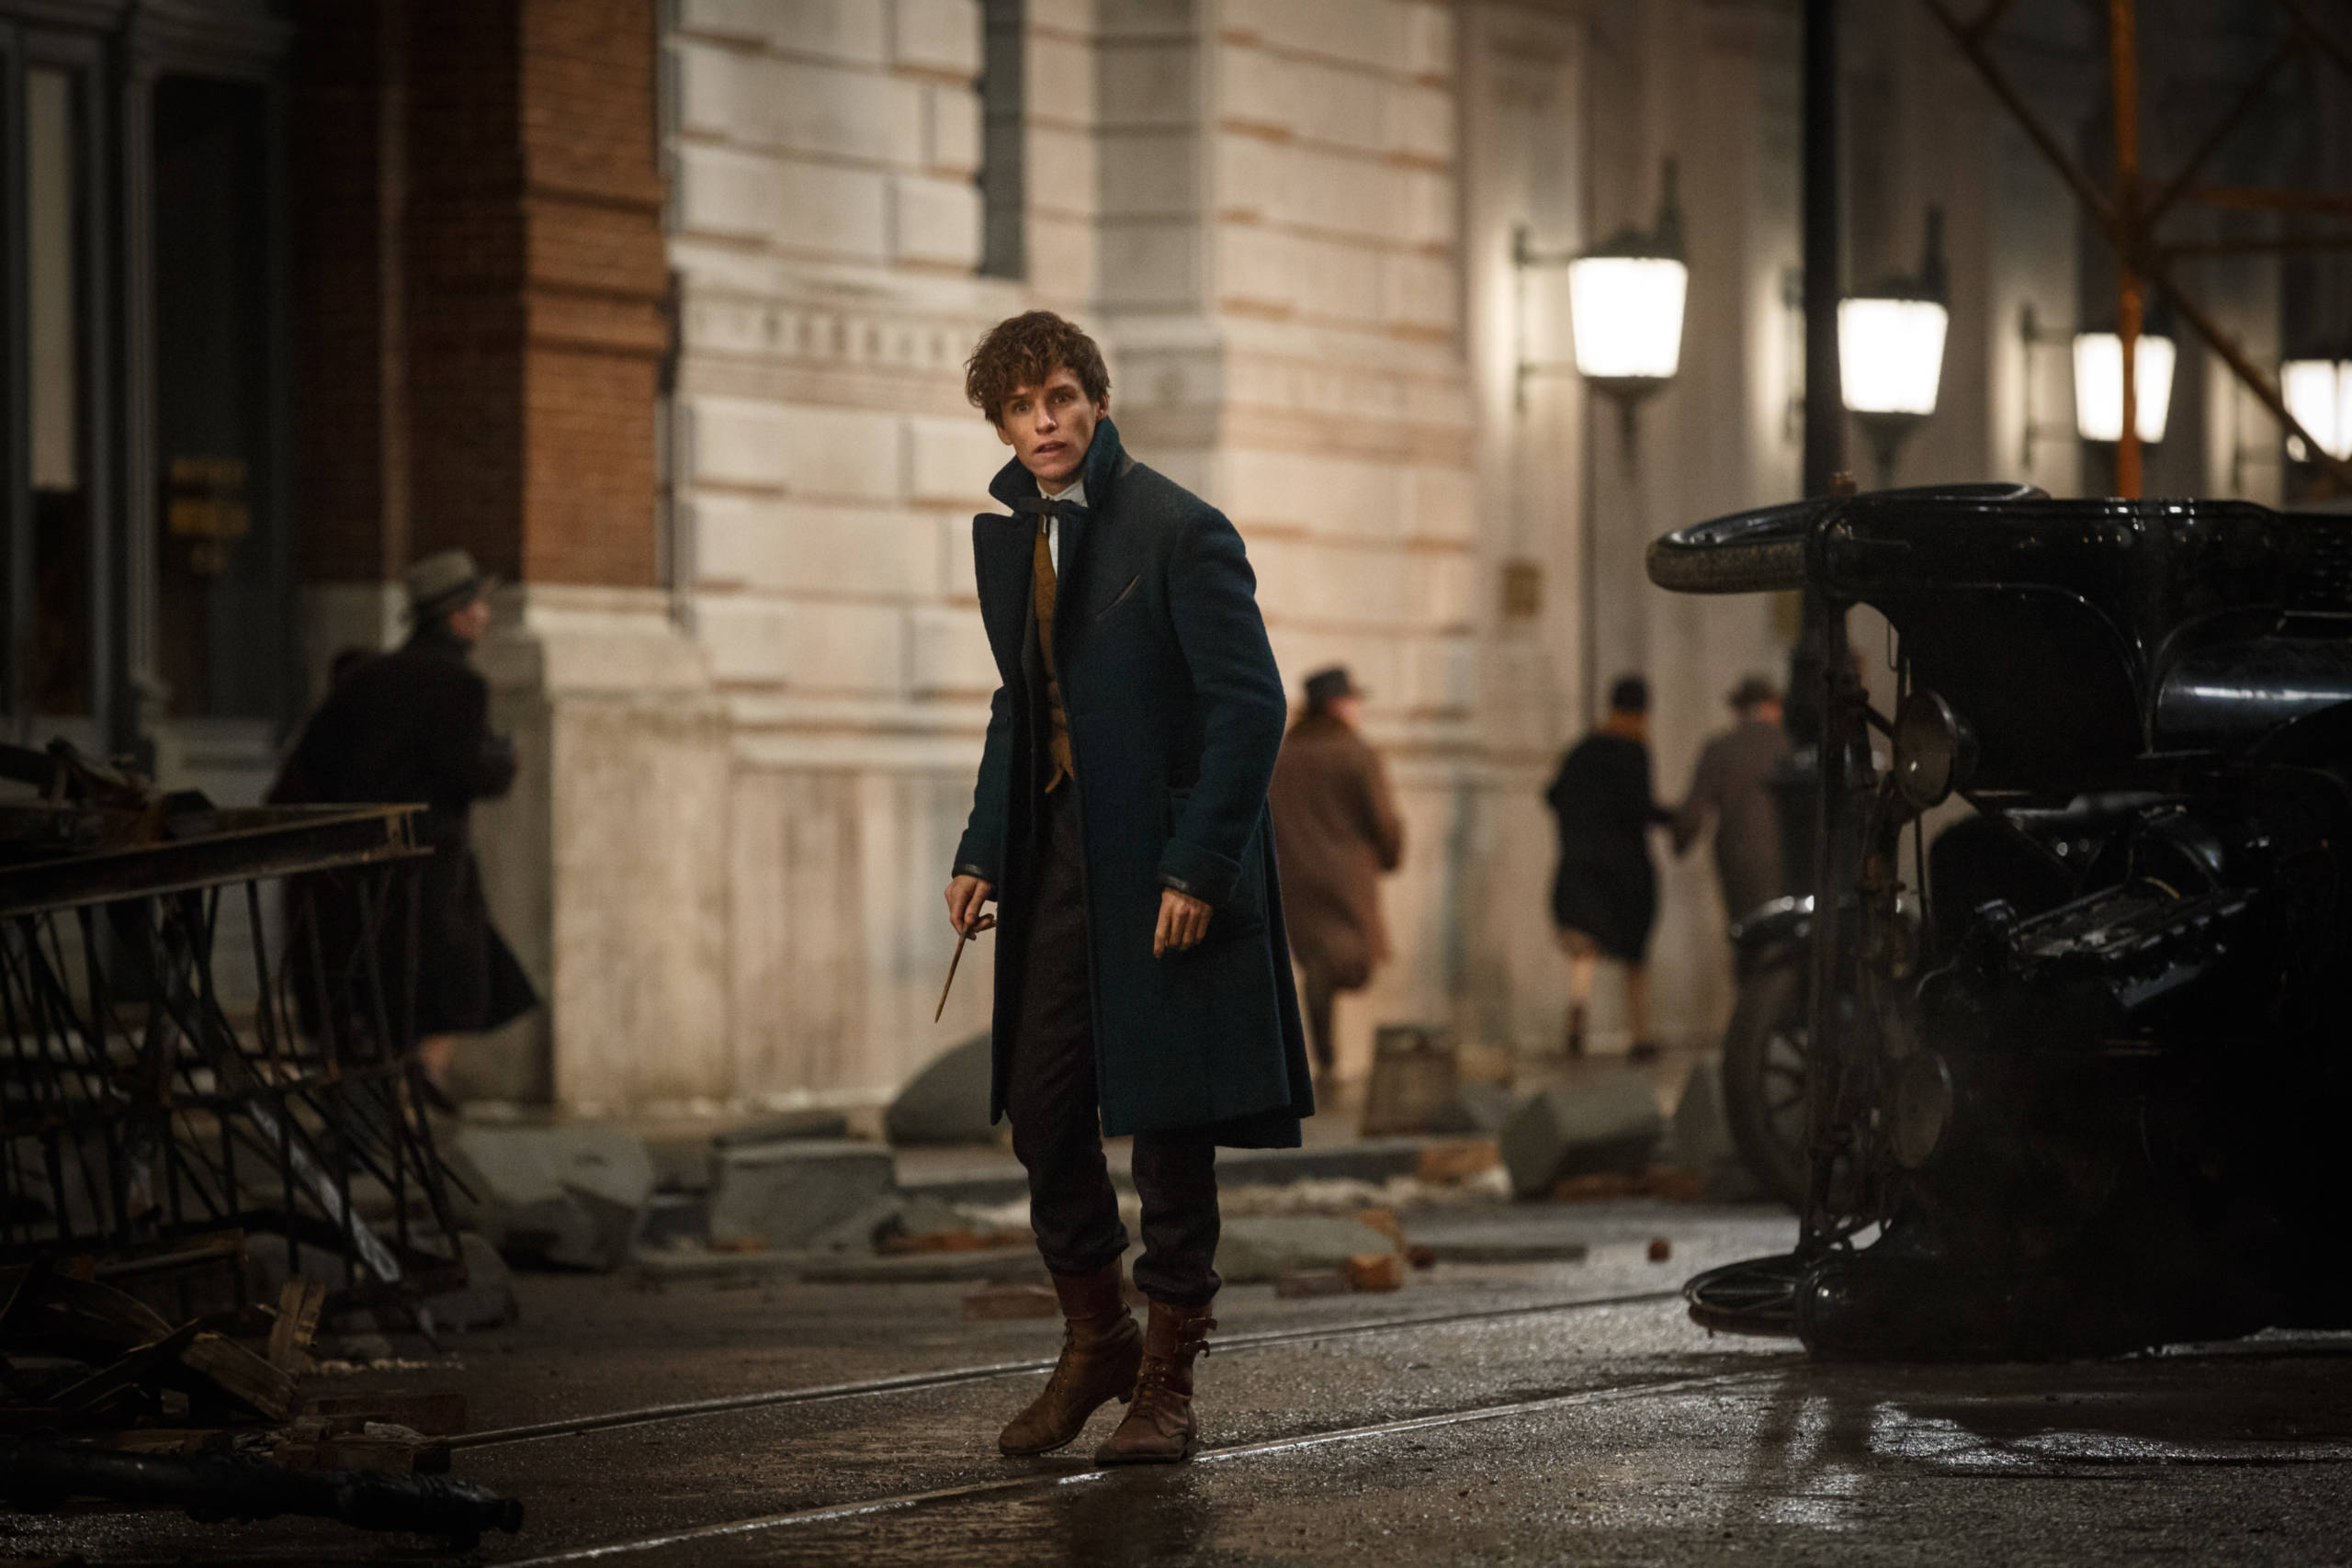 Newt Scamander (Eddie Redmayne) clutches his wand as he advances past upturned cars in Fantastic Beasts and Where to Find Them